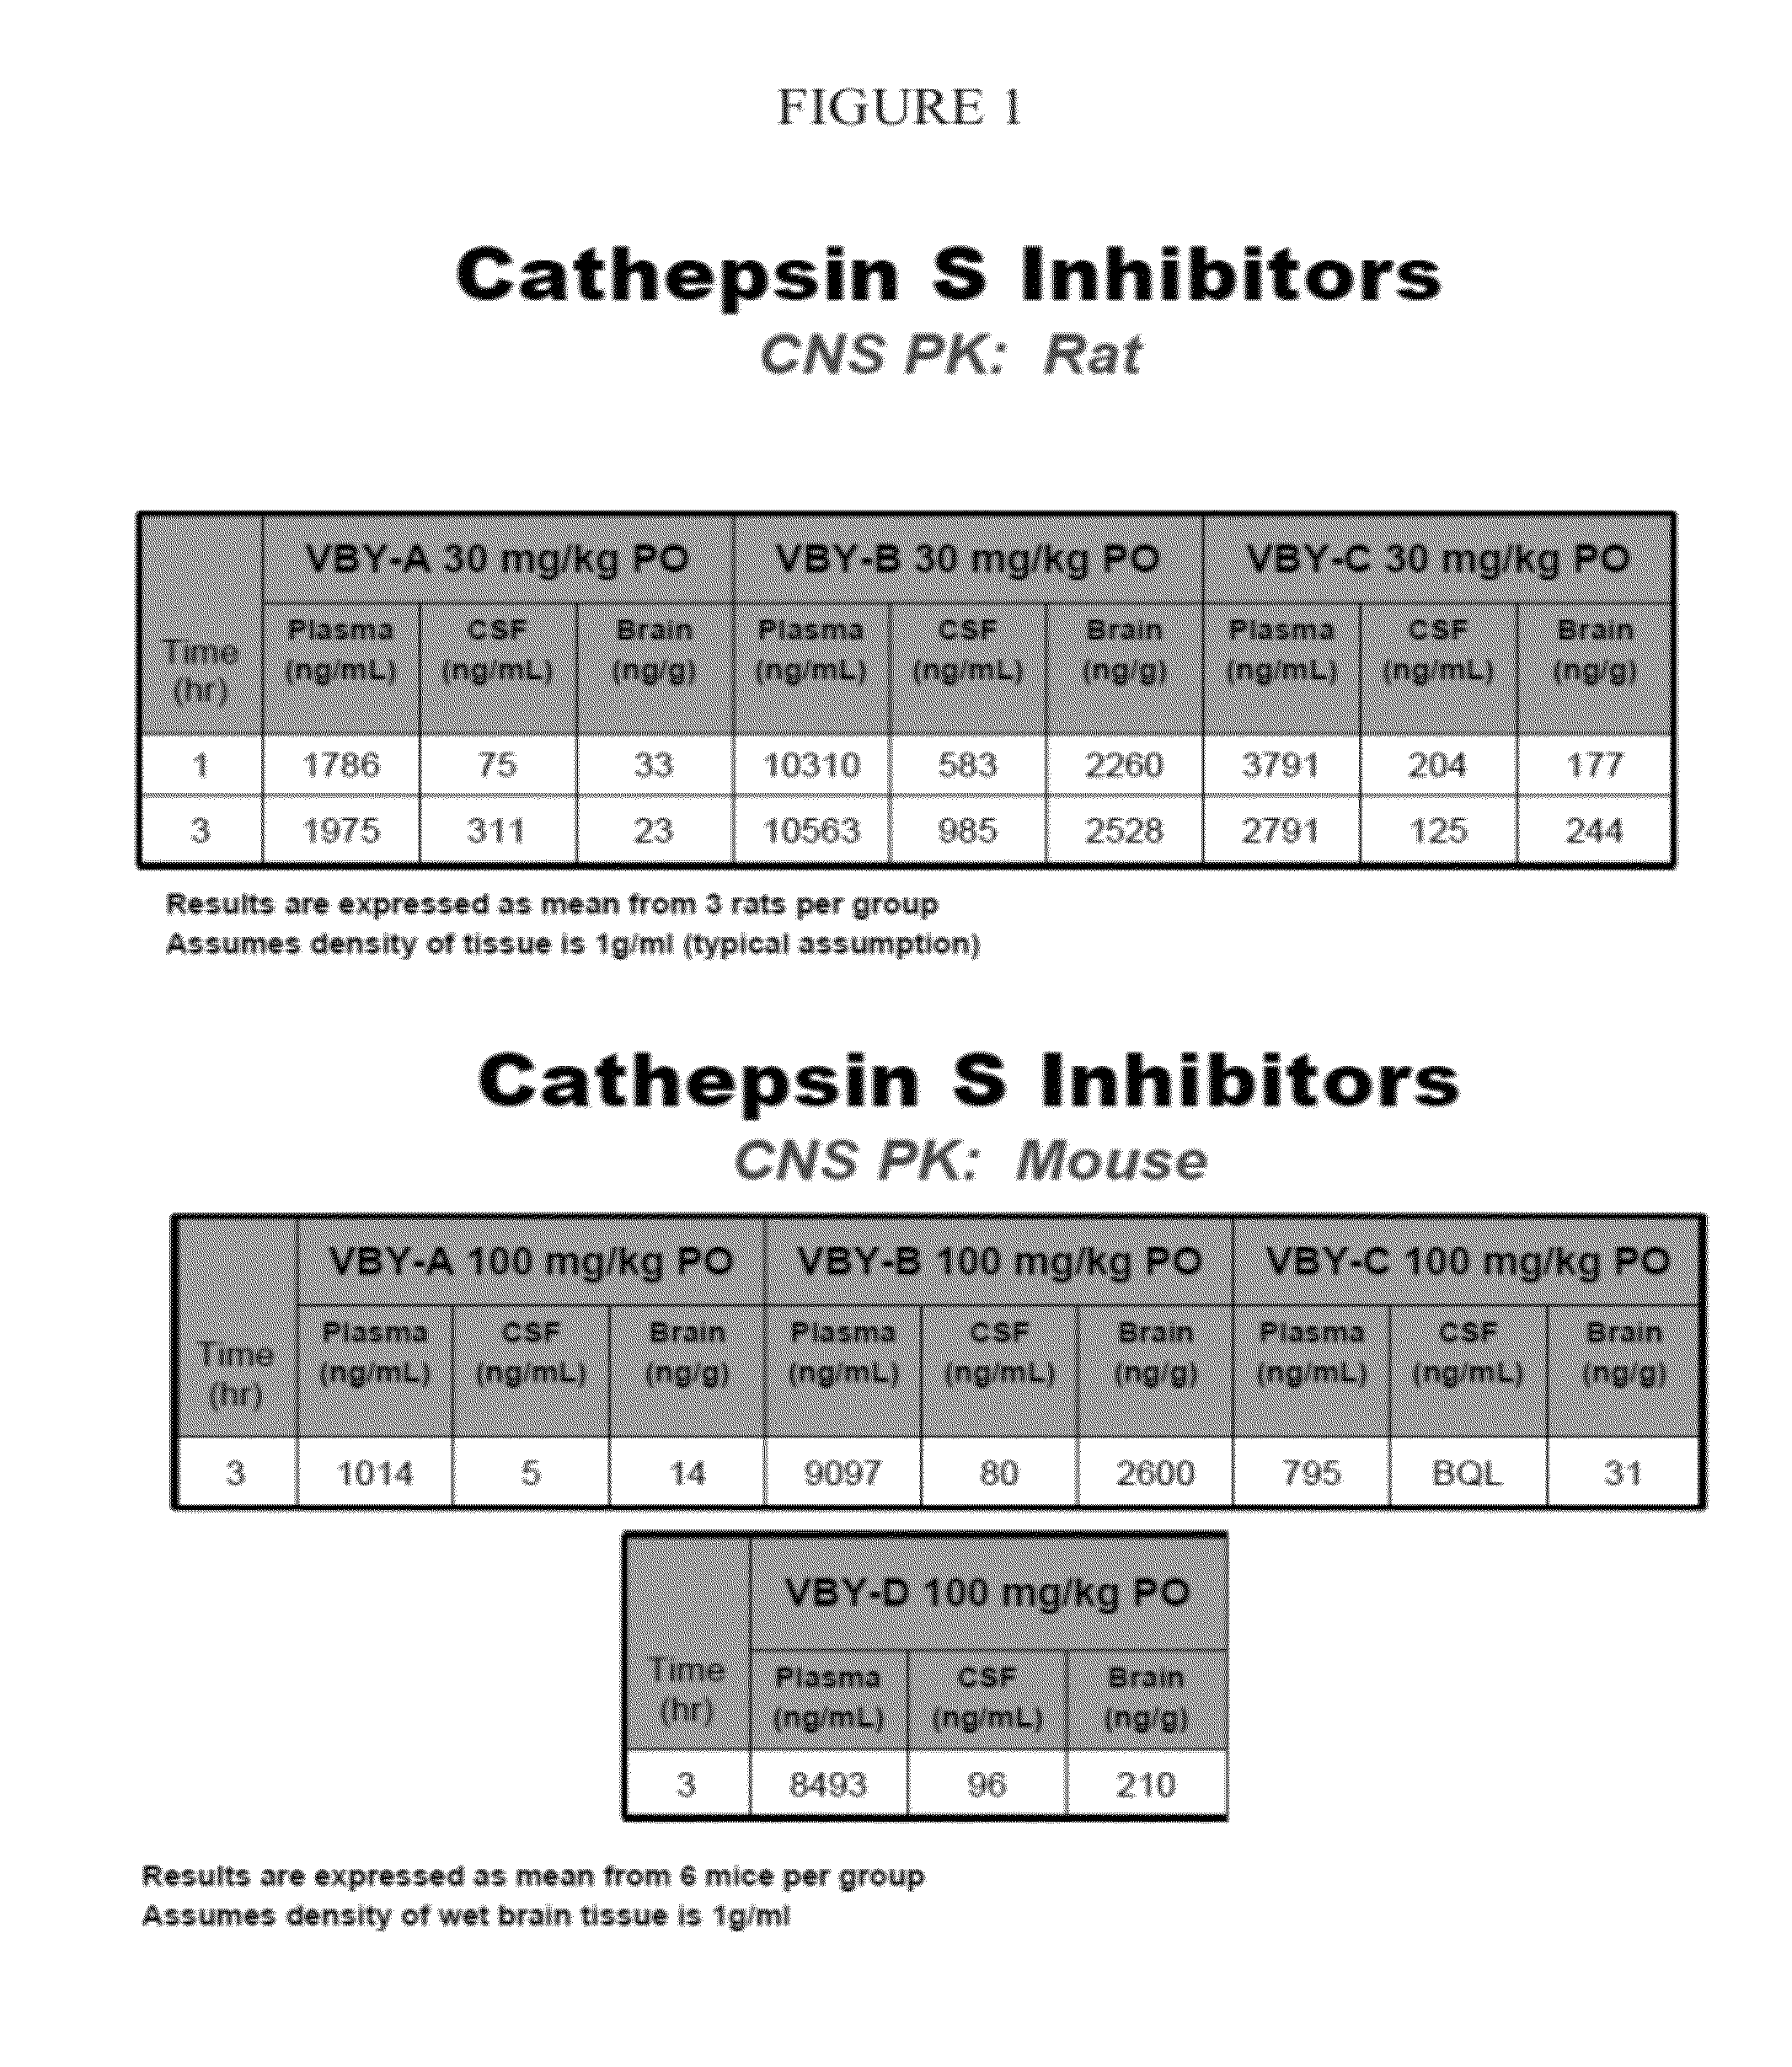 Cathepsin inhibitors for treating microglia-mediated neuron loss in the central nervous system